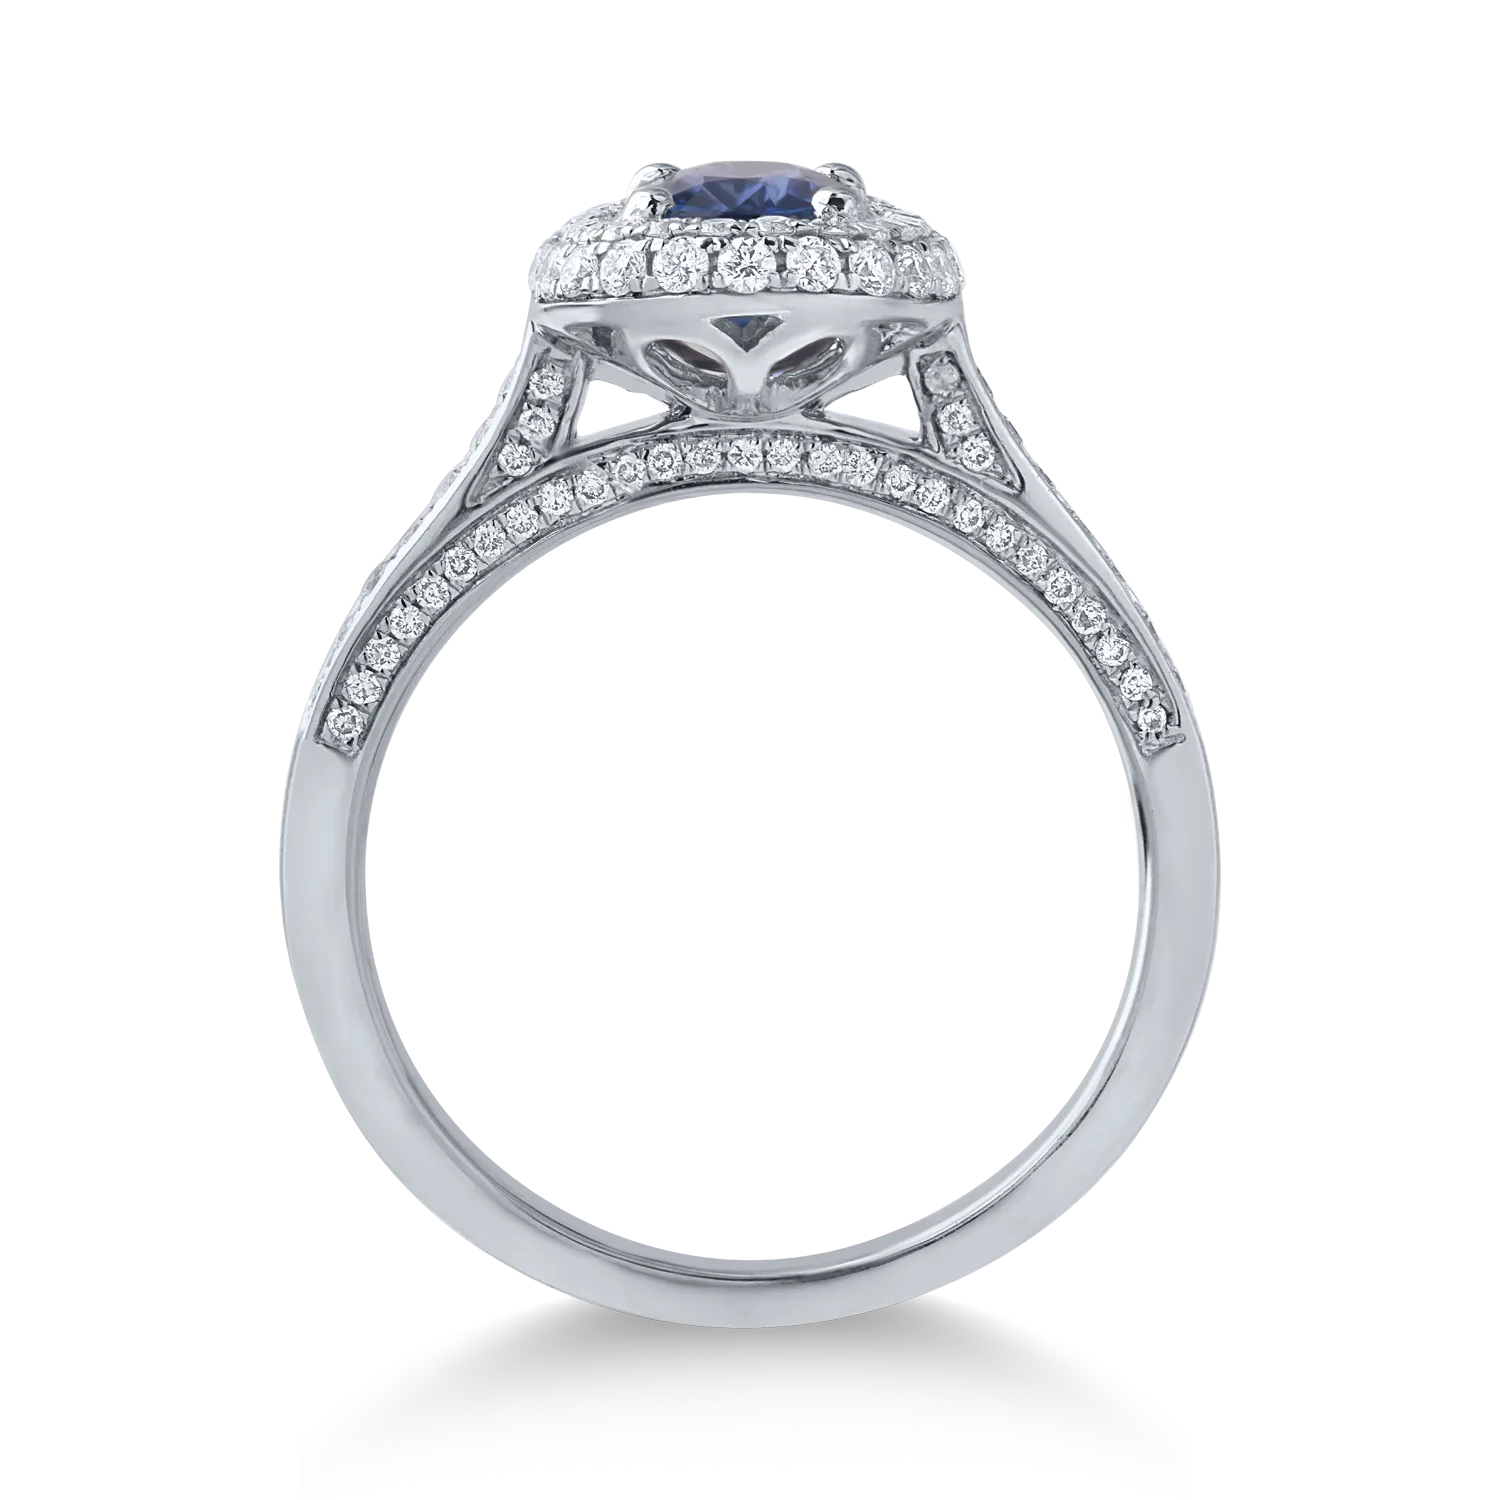 White gold ring with 1.16ct sapphire and 0.56ct diamonds